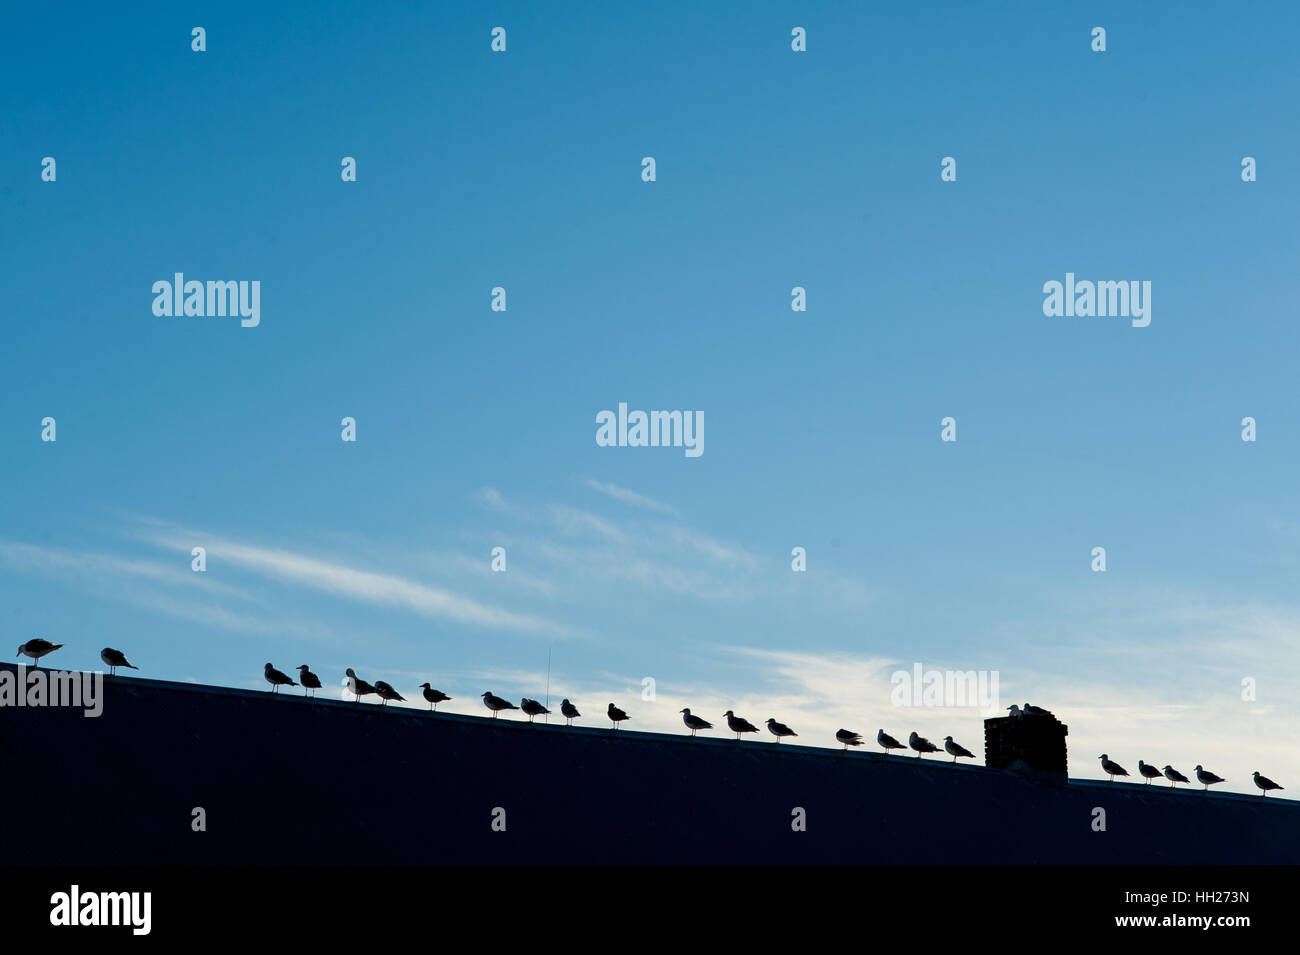 Silhouettes of several birds (seagulls) standing in line on the top of a roof with blue sky in the background Stock Photo